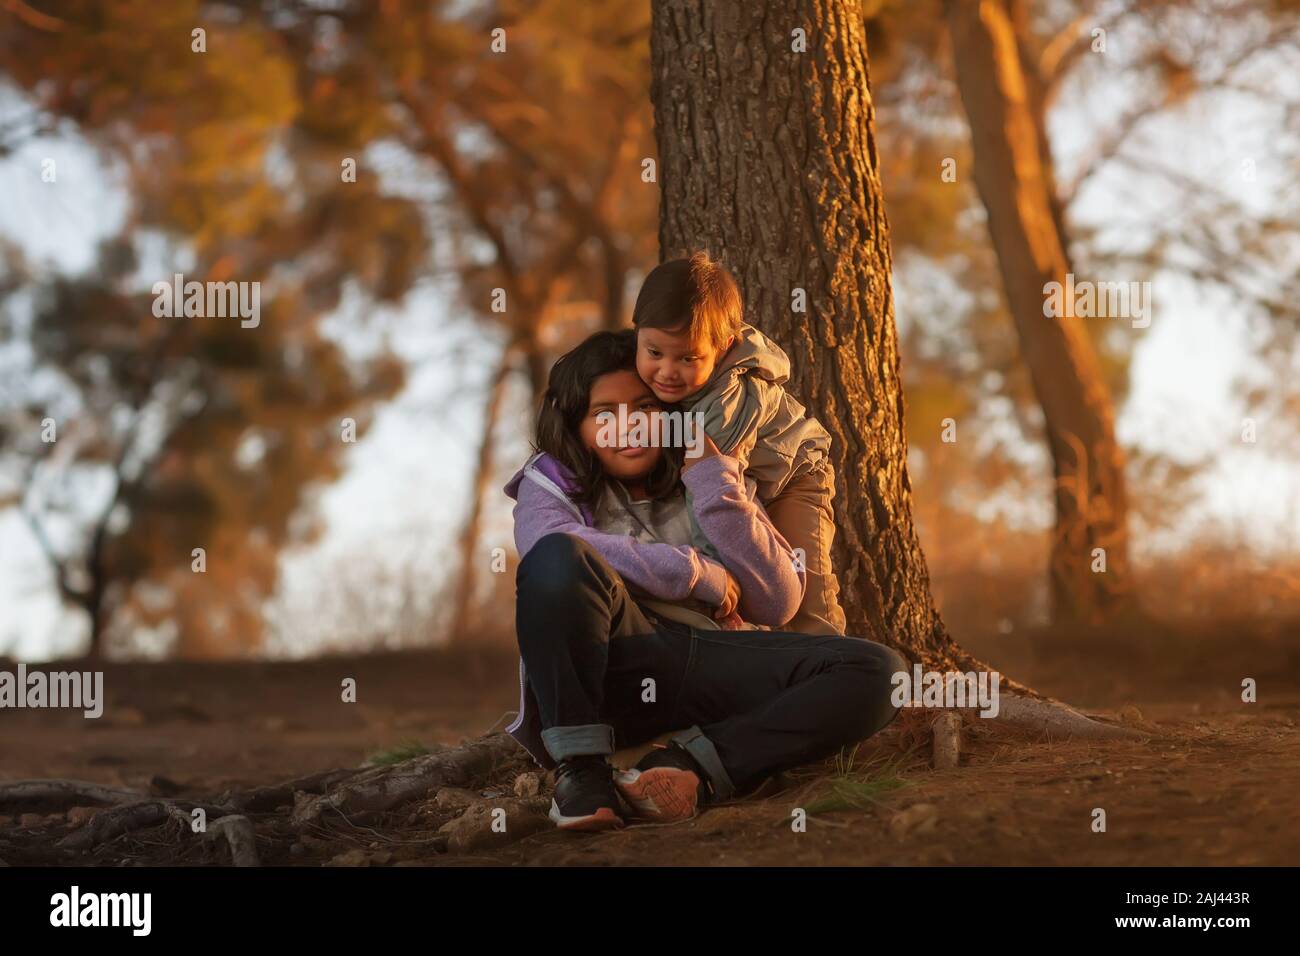 A big sister and young brother sitting near a tree on a hill and hugging each other while enjoying a sunset. Stock Photo